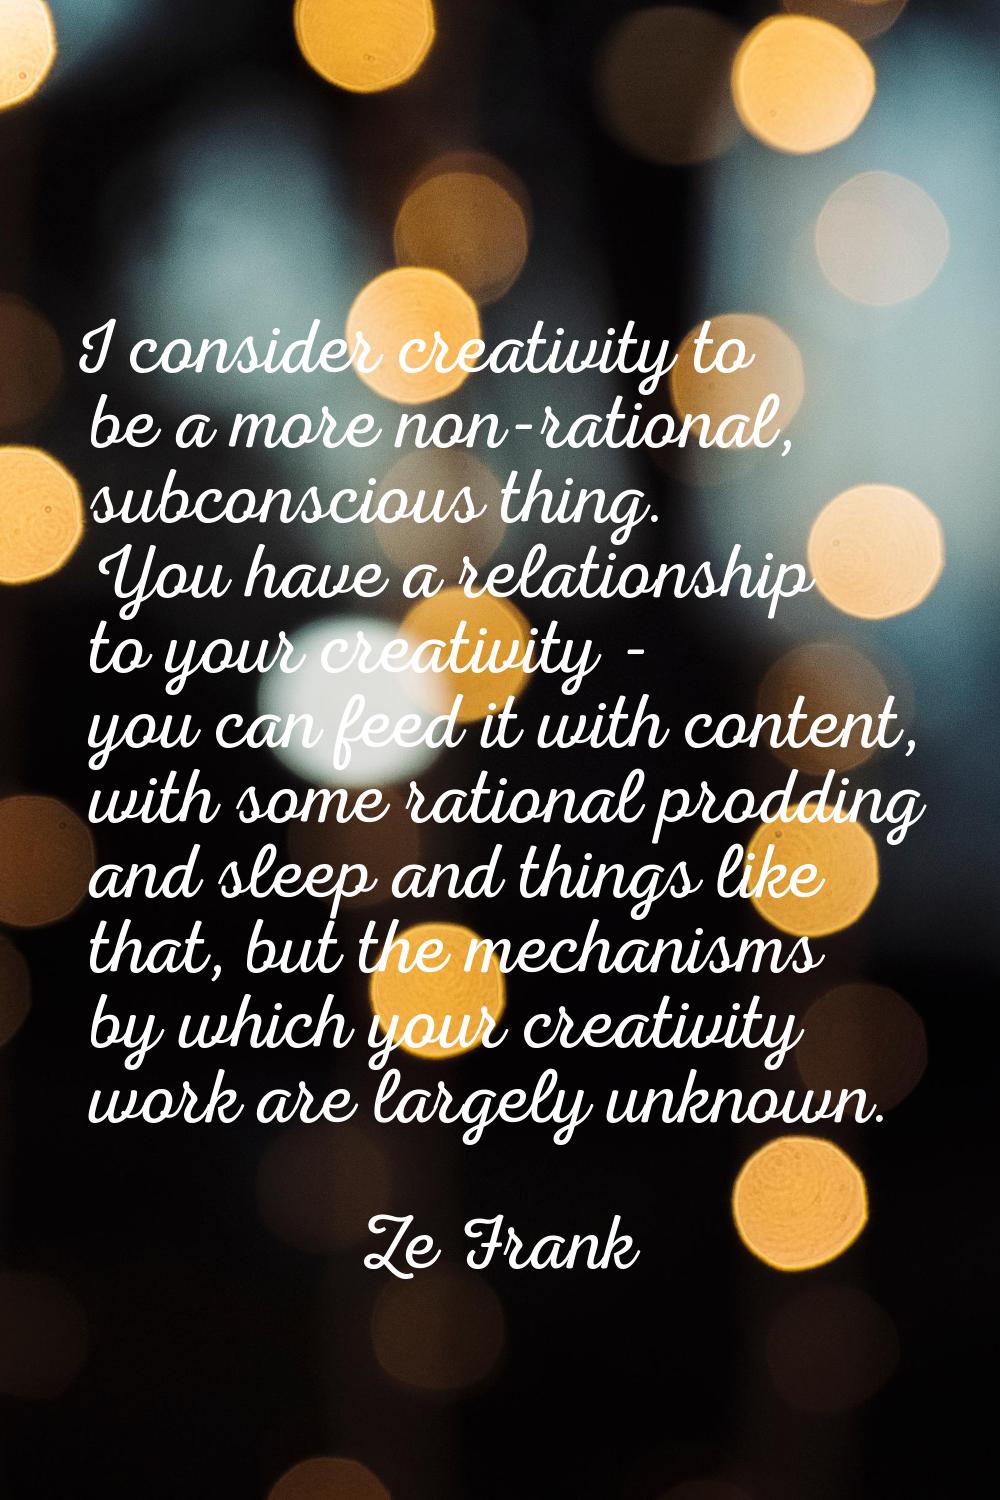 I consider creativity to be a more non-rational, subconscious thing. You have a relationship to you